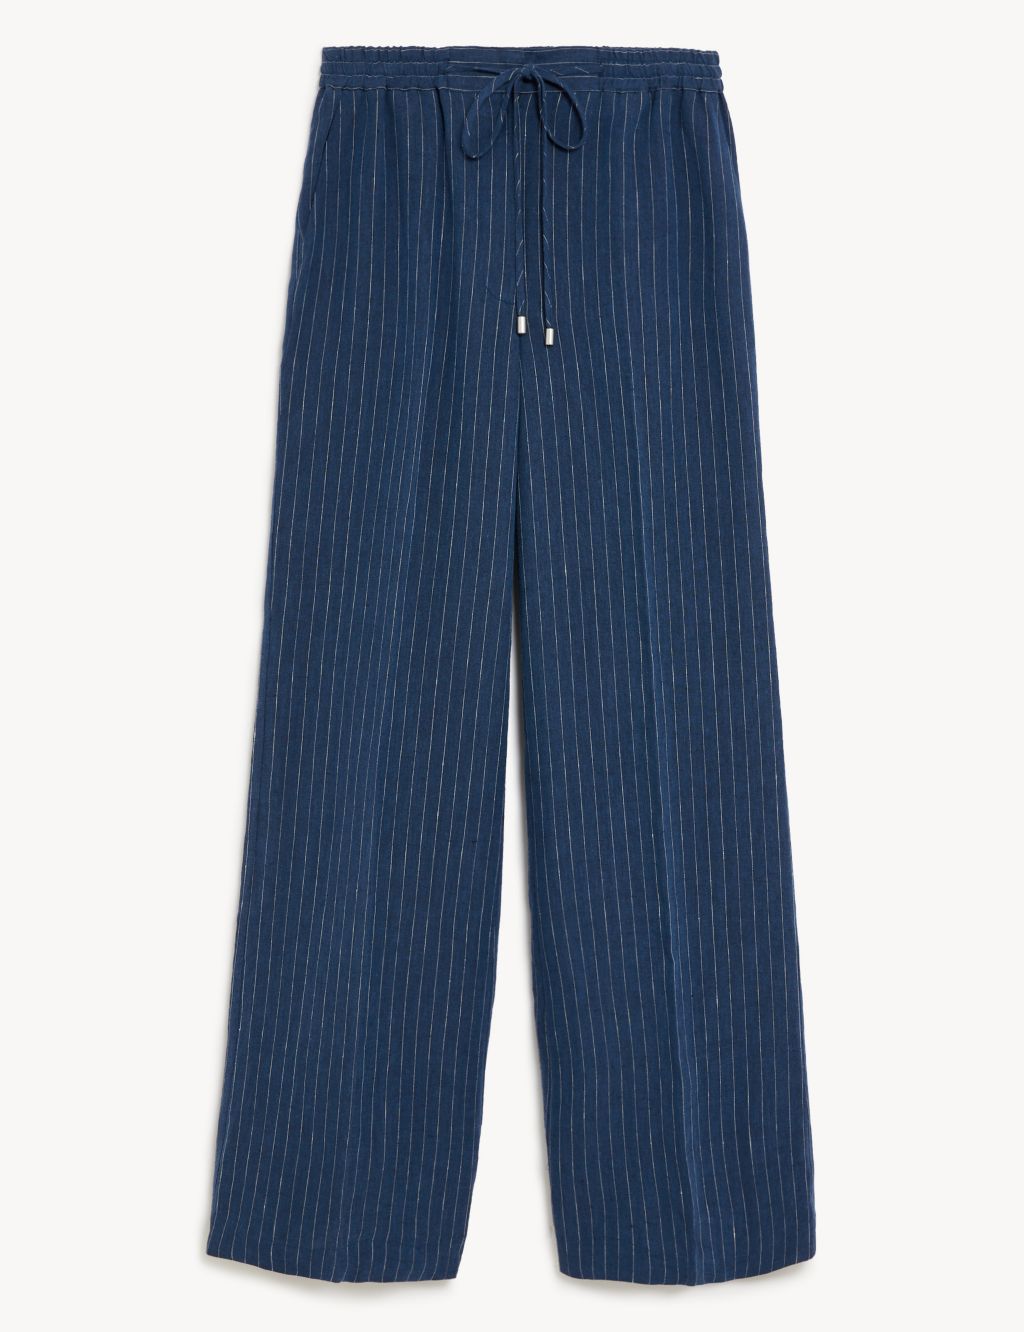 Pure Linen Pinstripe Trousers image 2